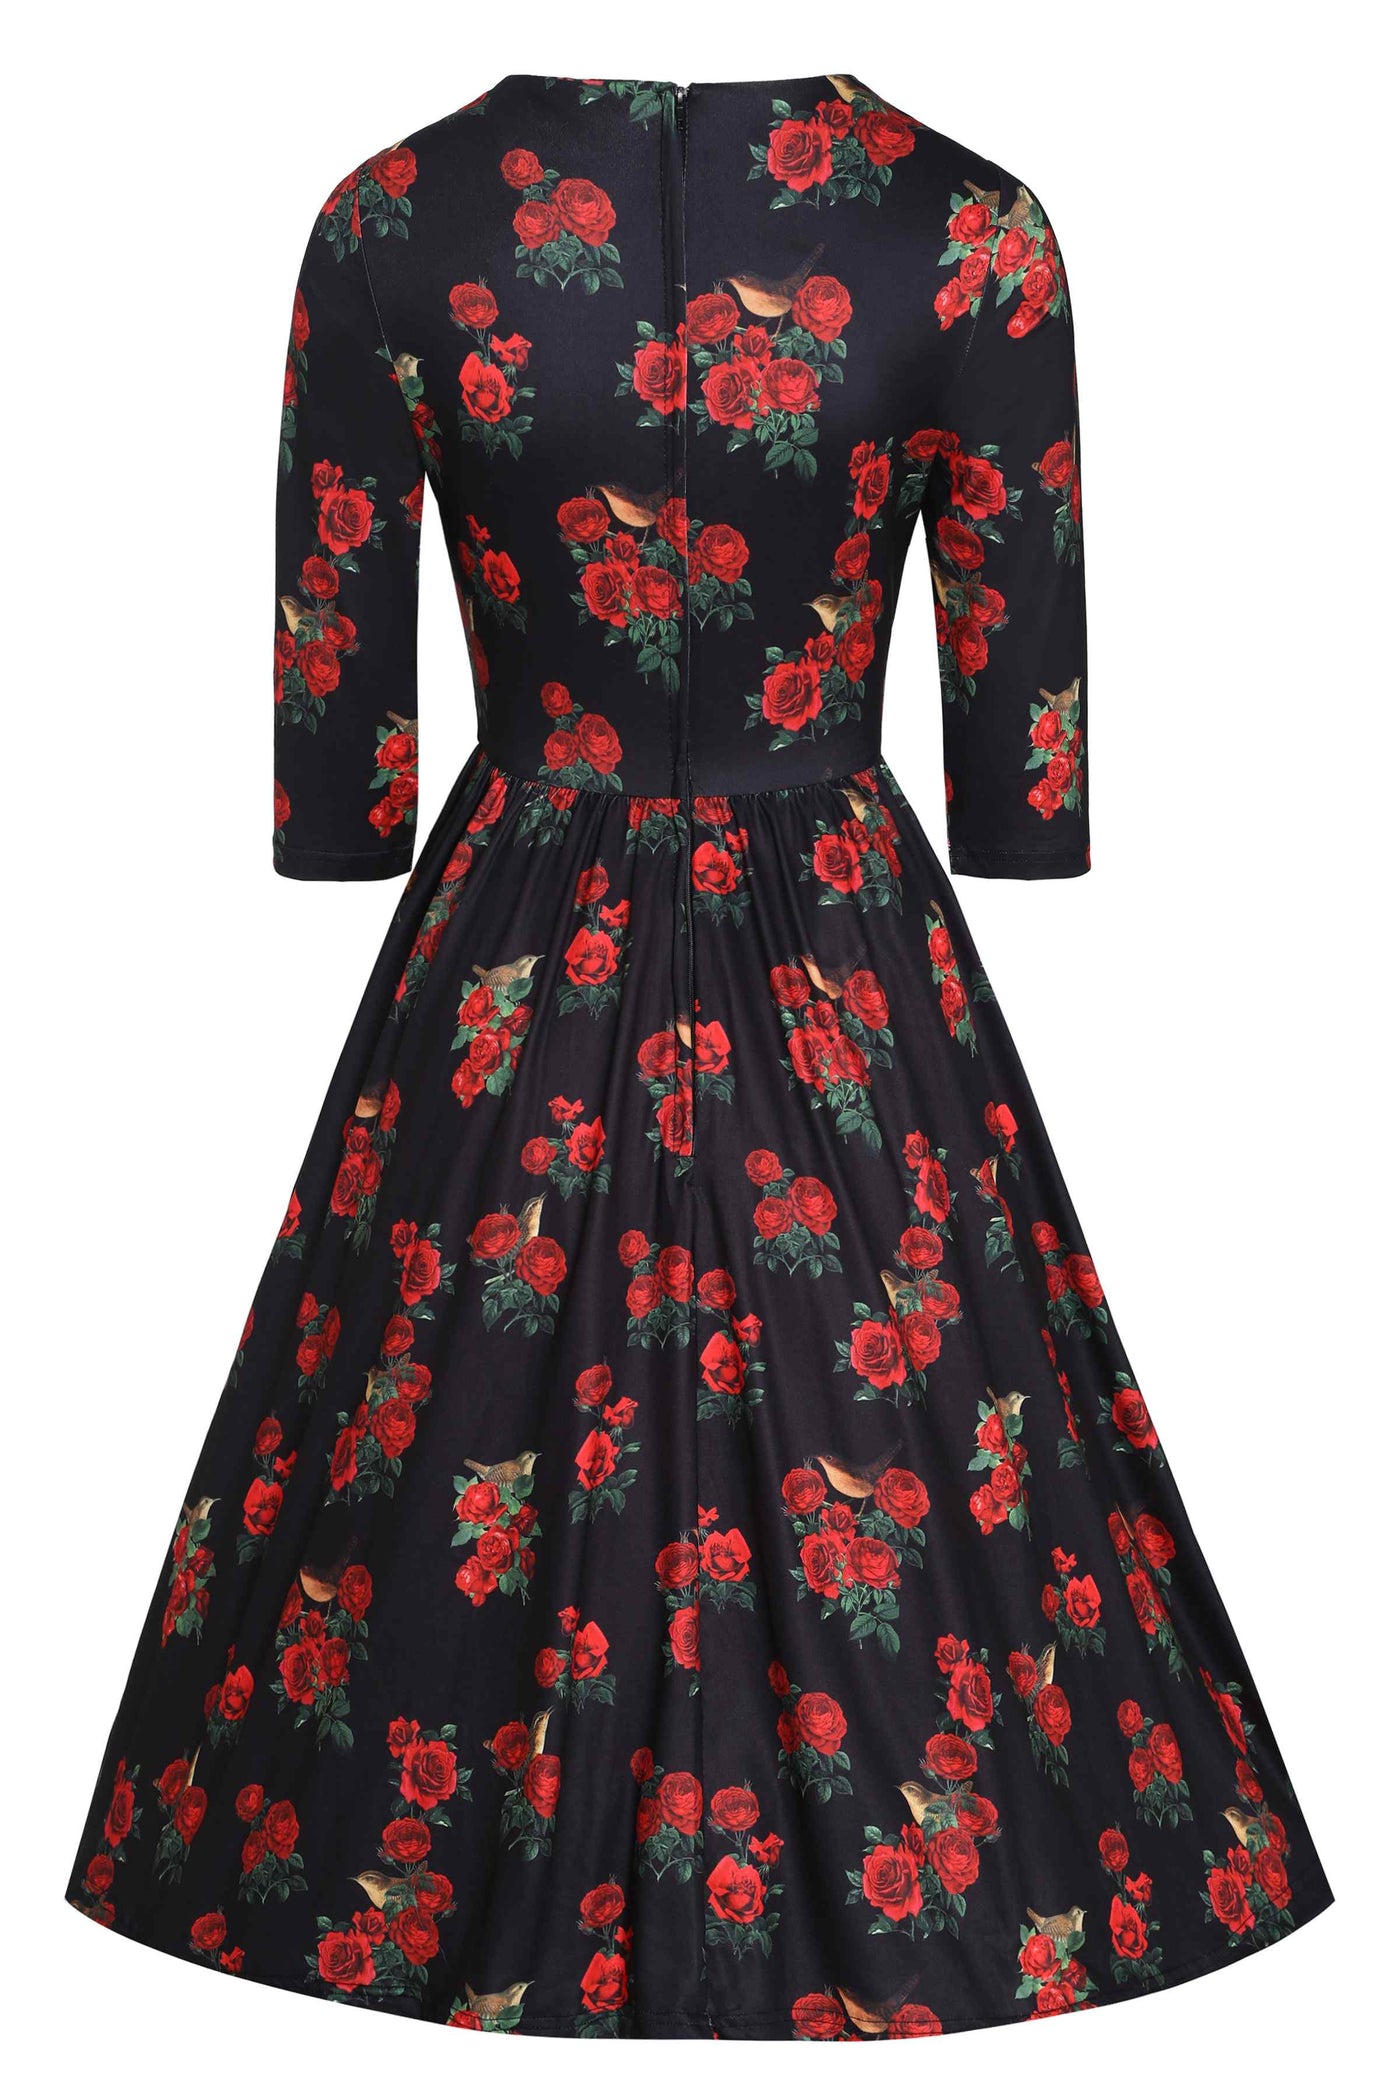 Back View of Red Rose and Bird Print Long Sleeved Dress in Black